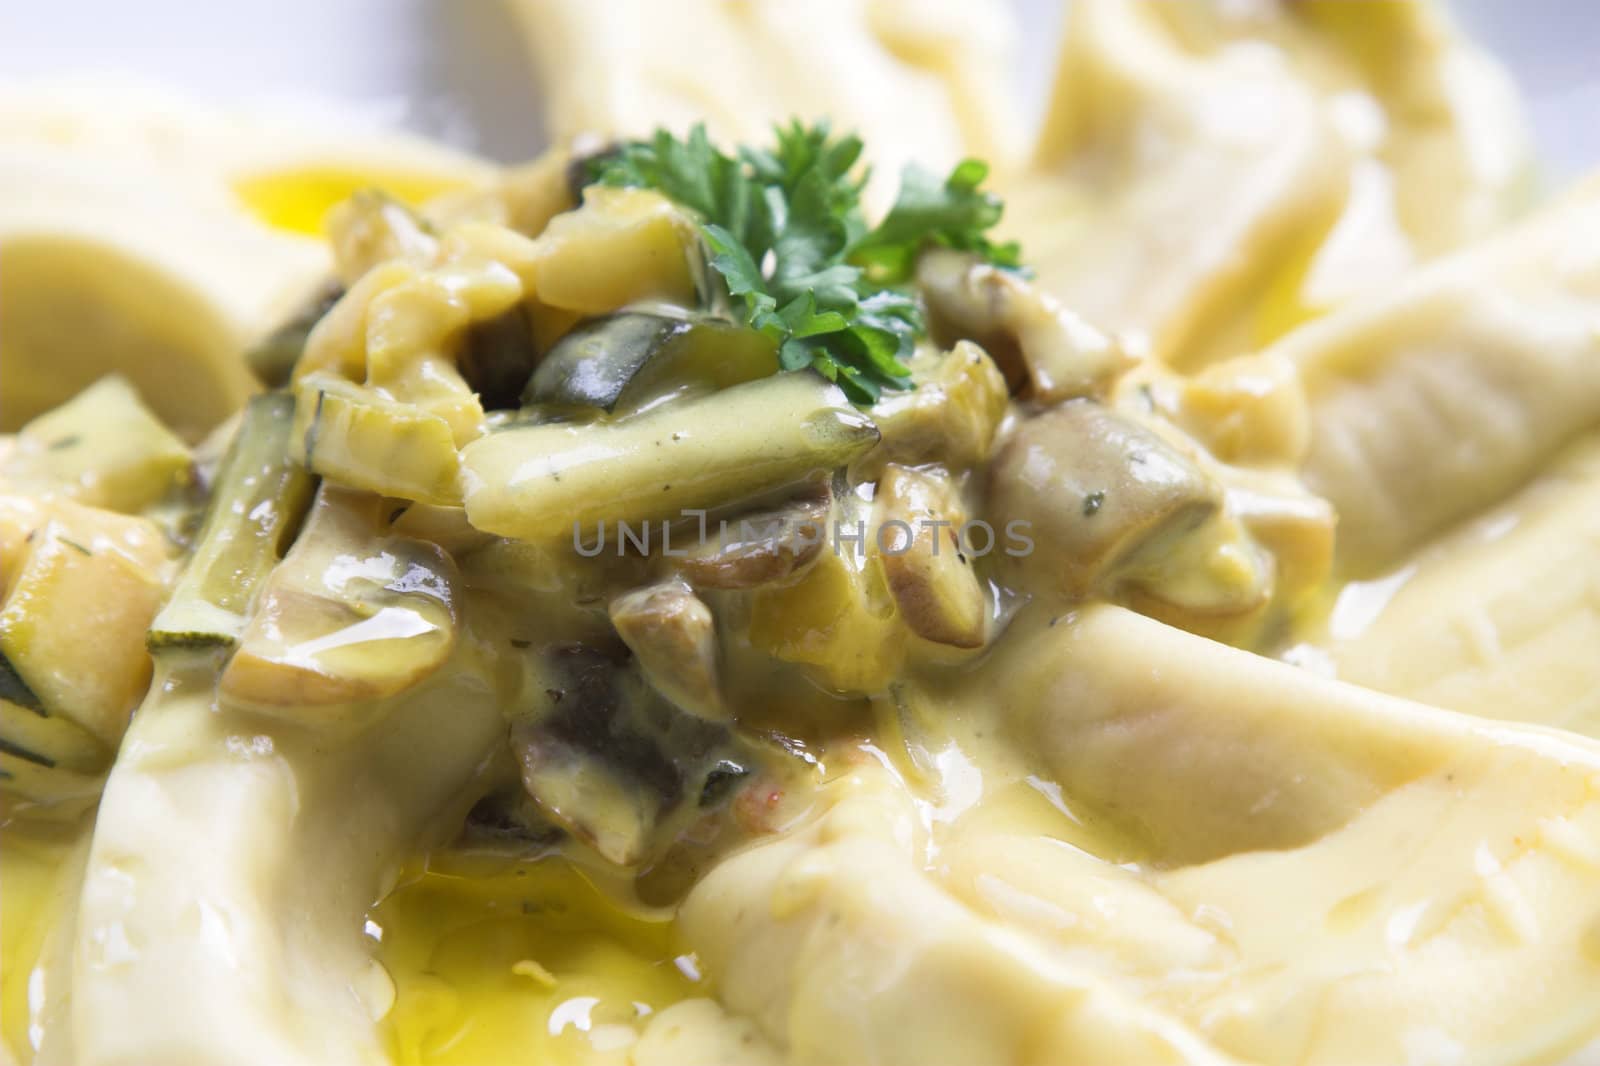 Delicious pasta dish with filled pasta, mushrooms, courgette made in a sauce of cream and oliveoil and herbs